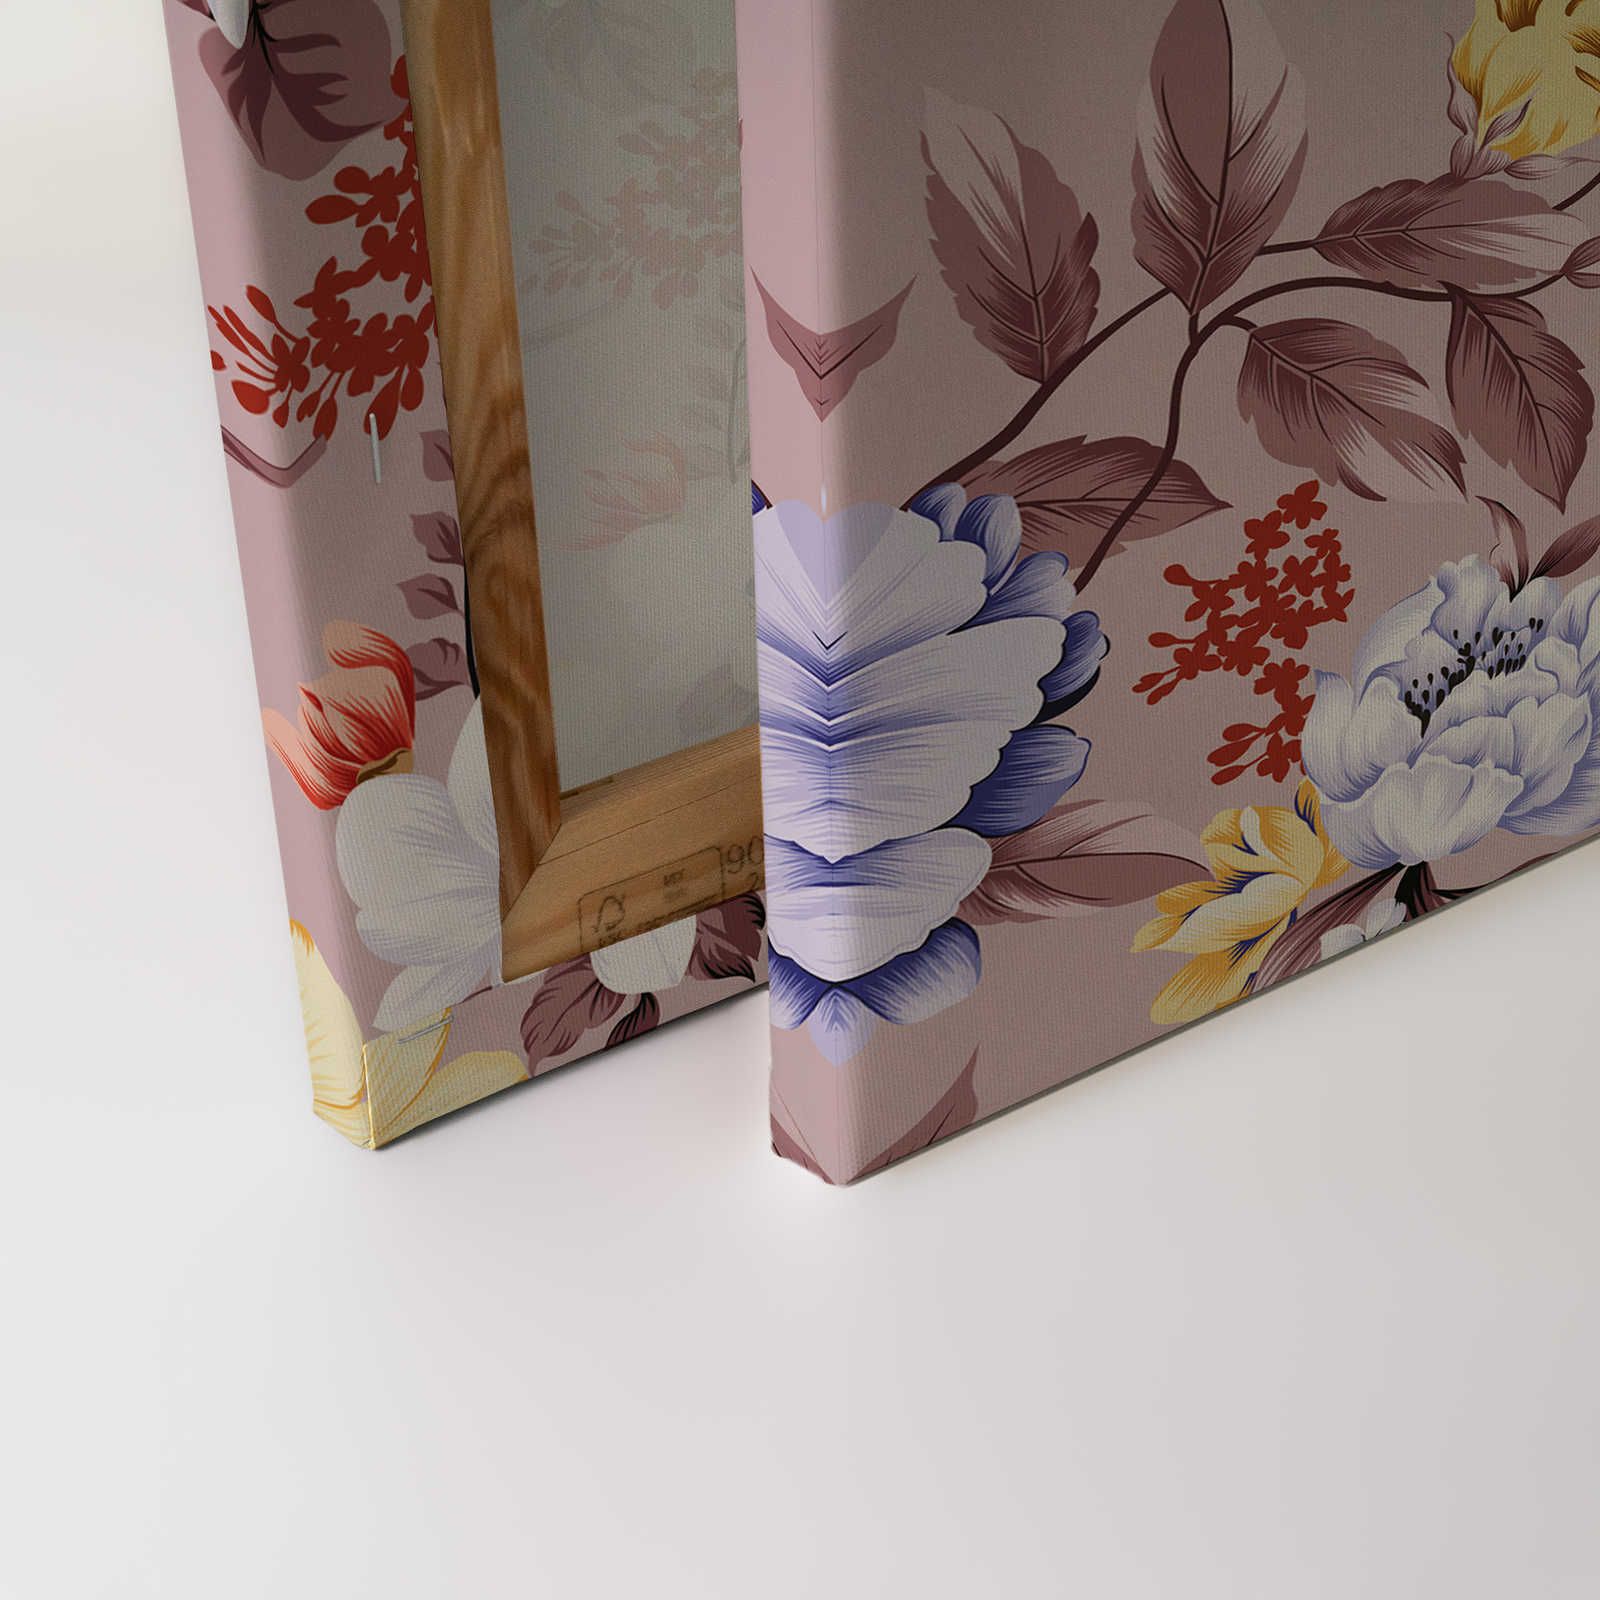             Canvas floral with flowers and leaves - 90 cm x 60 cm
        